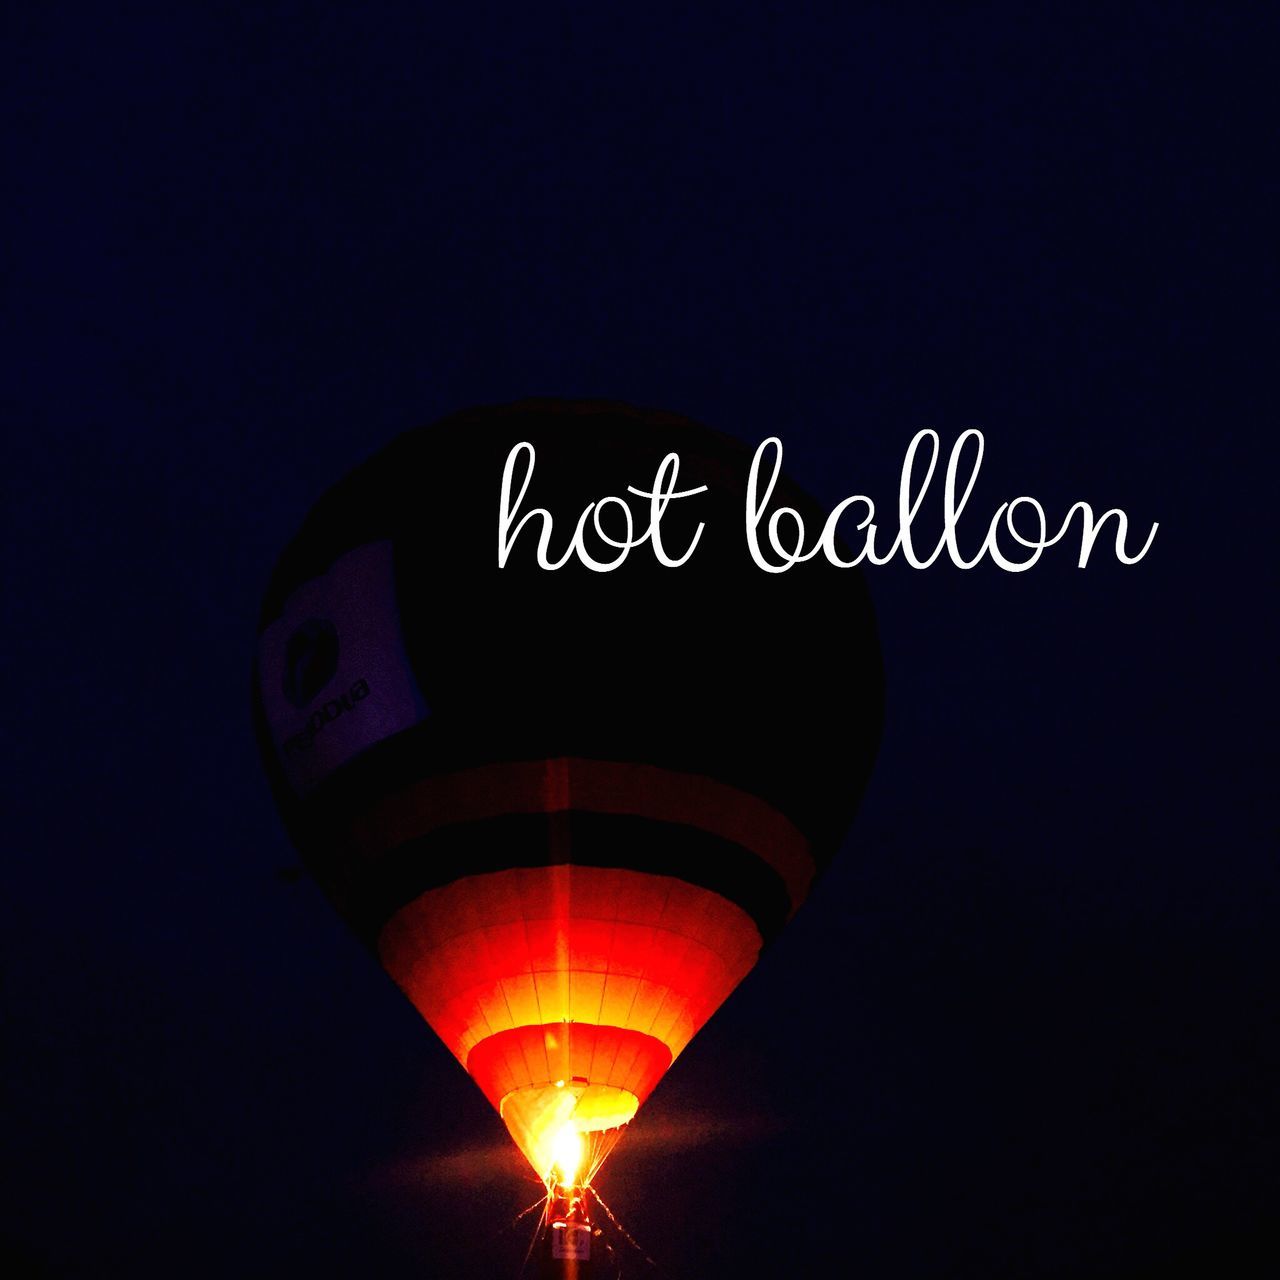 copy space, illuminated, low angle view, clear sky, night, lighting equipment, communication, blue, sky, hot air balloon, travel, outdoors, silhouette, no people, guidance, electric light, transportation, dusk, text, glowing